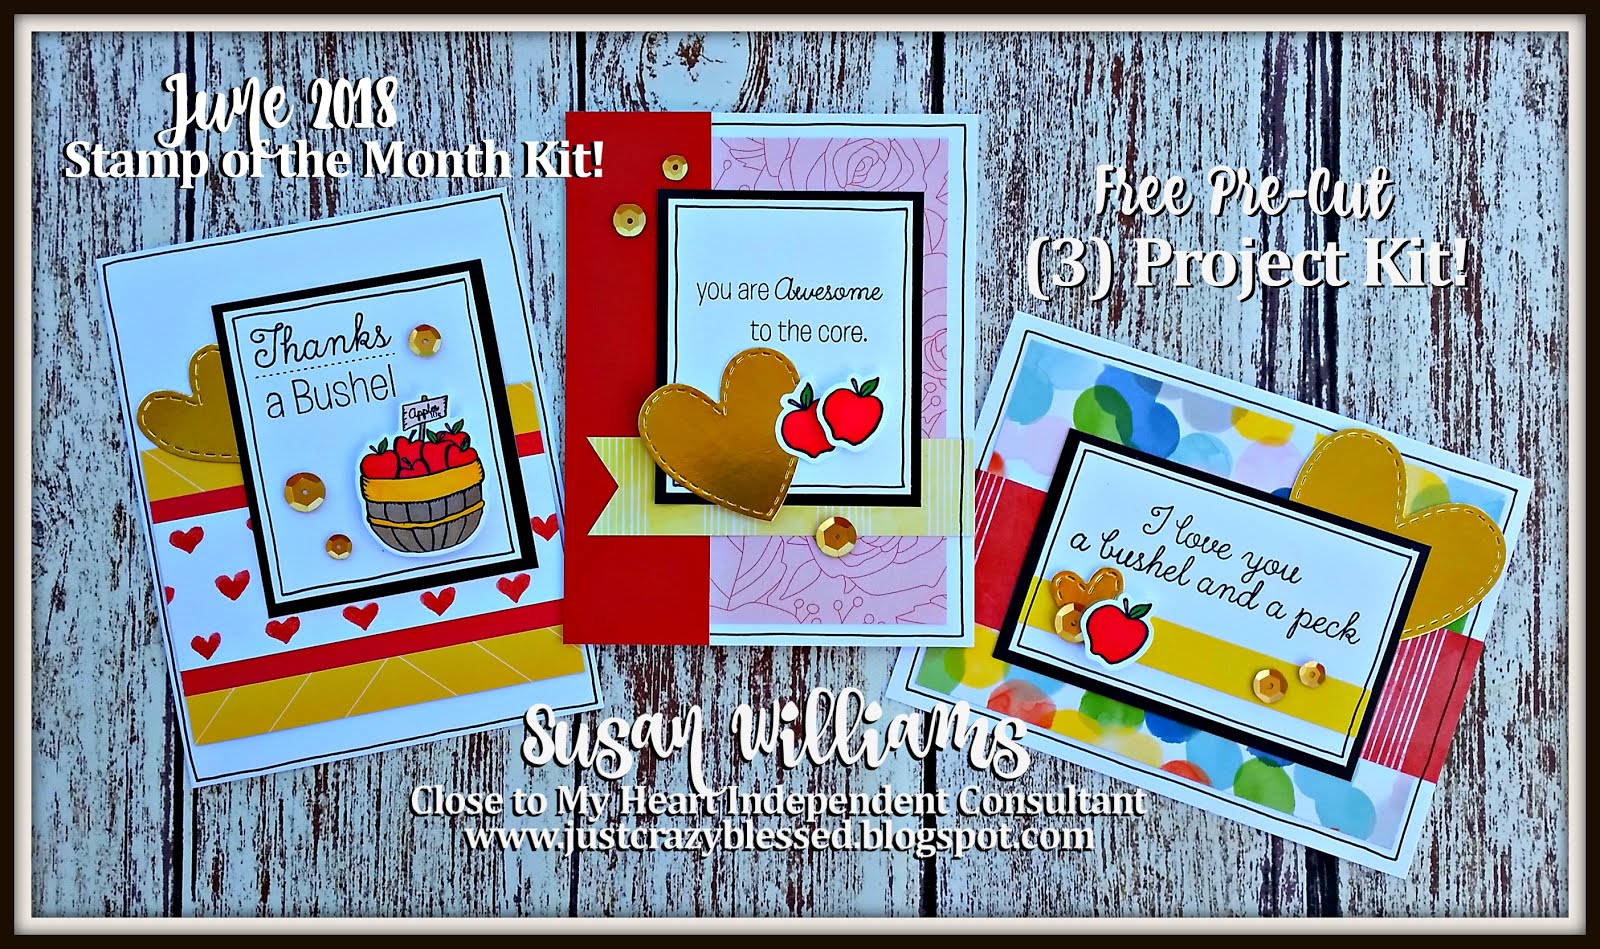 June 2018 Stamp of the Month Kit!